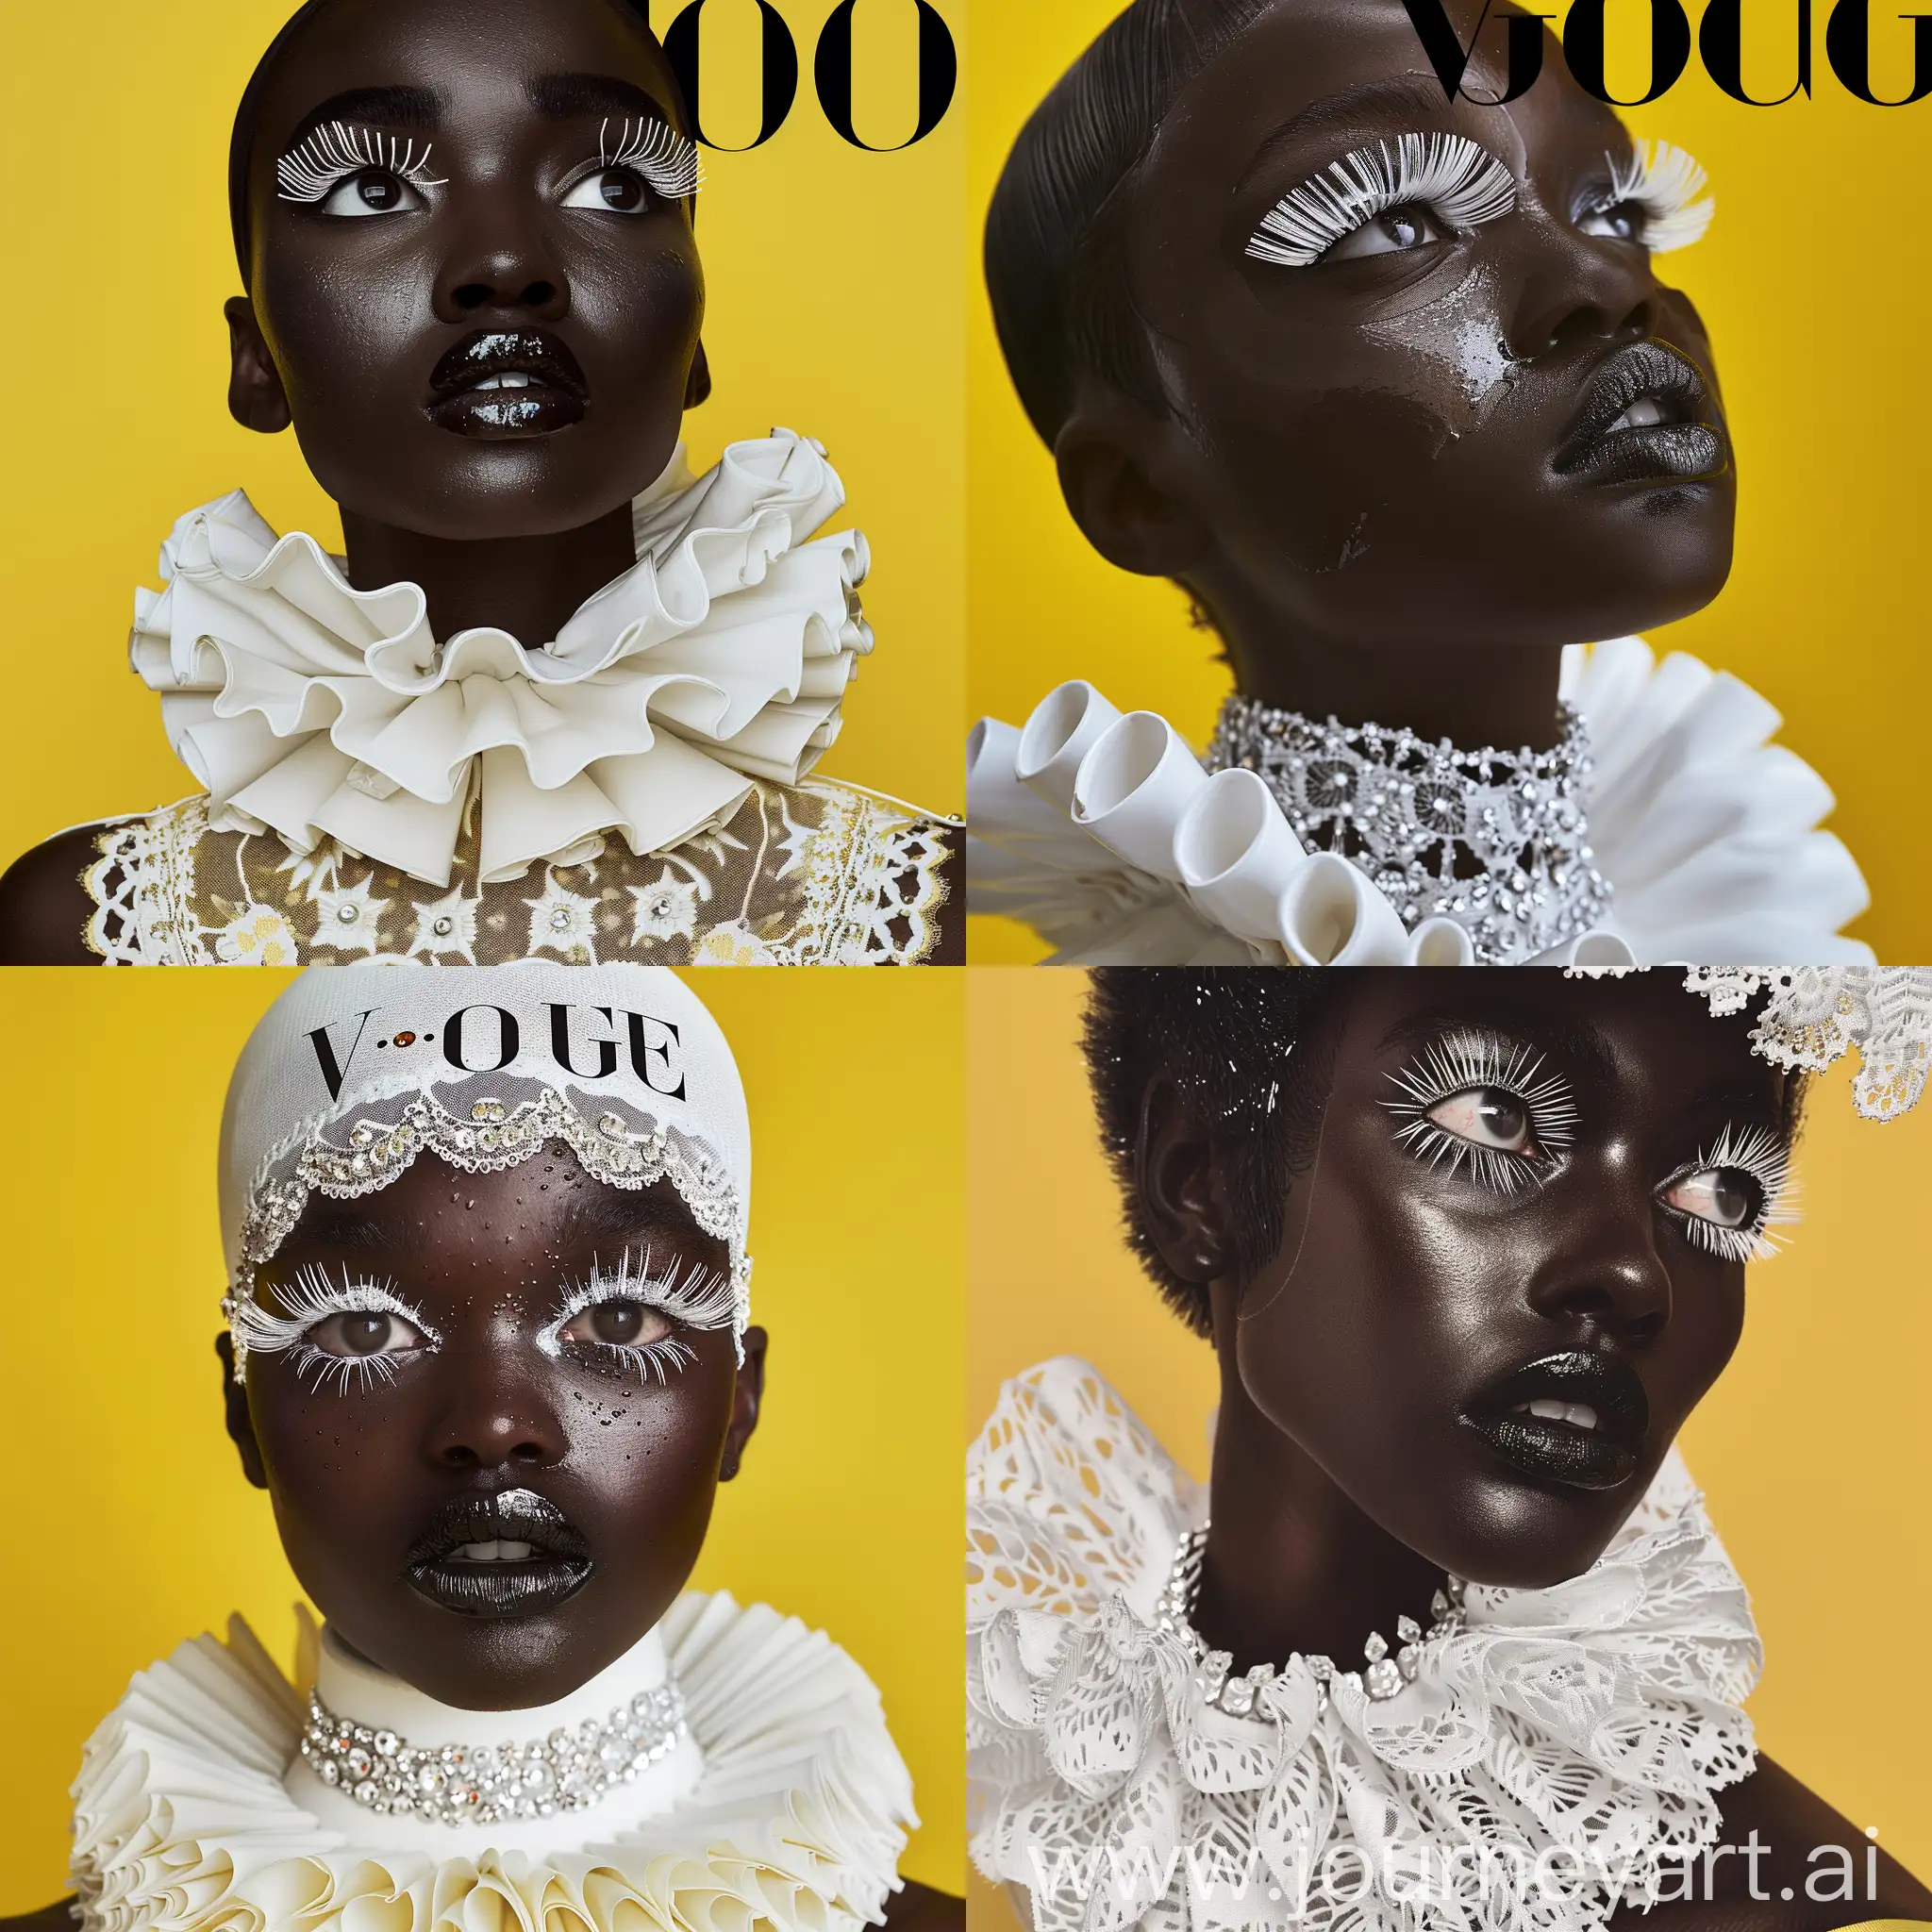 90s-Vogue-Cover-Black-Model-with-Unique-Aesthetic-and-Lace-Jabot-on-Yellow-Background